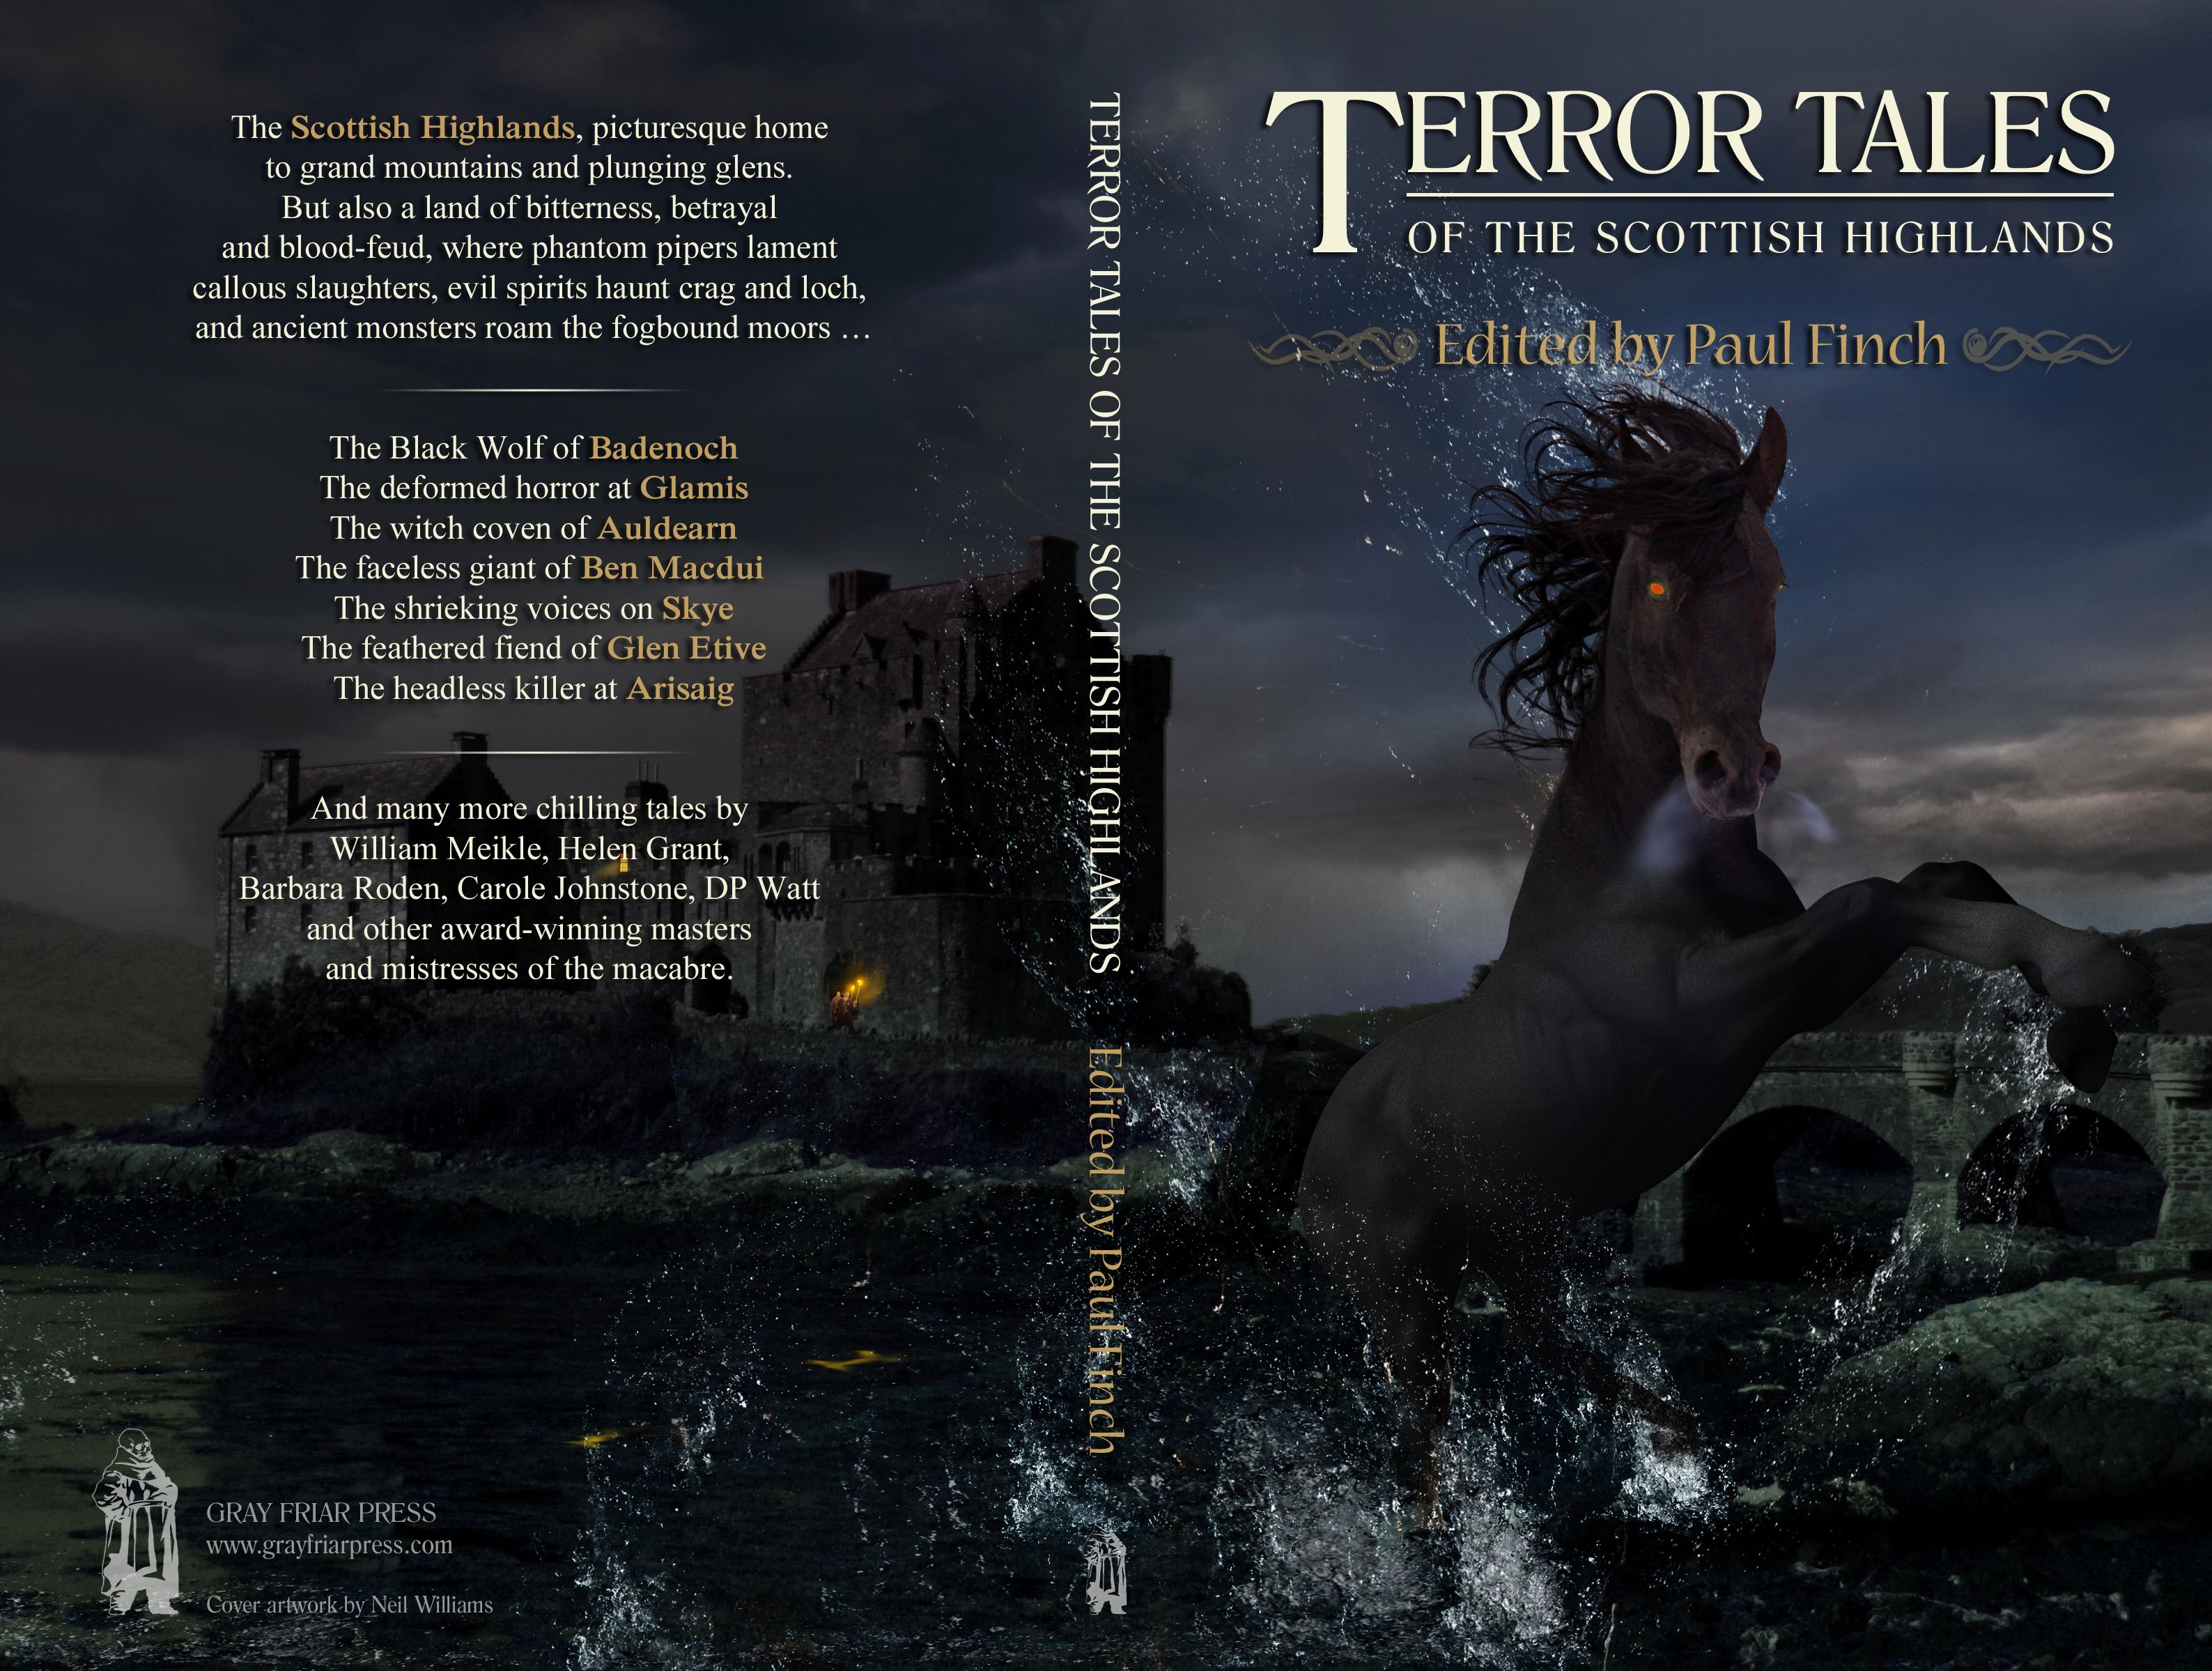 Terror tales of the Scottish Highlands - final full cover